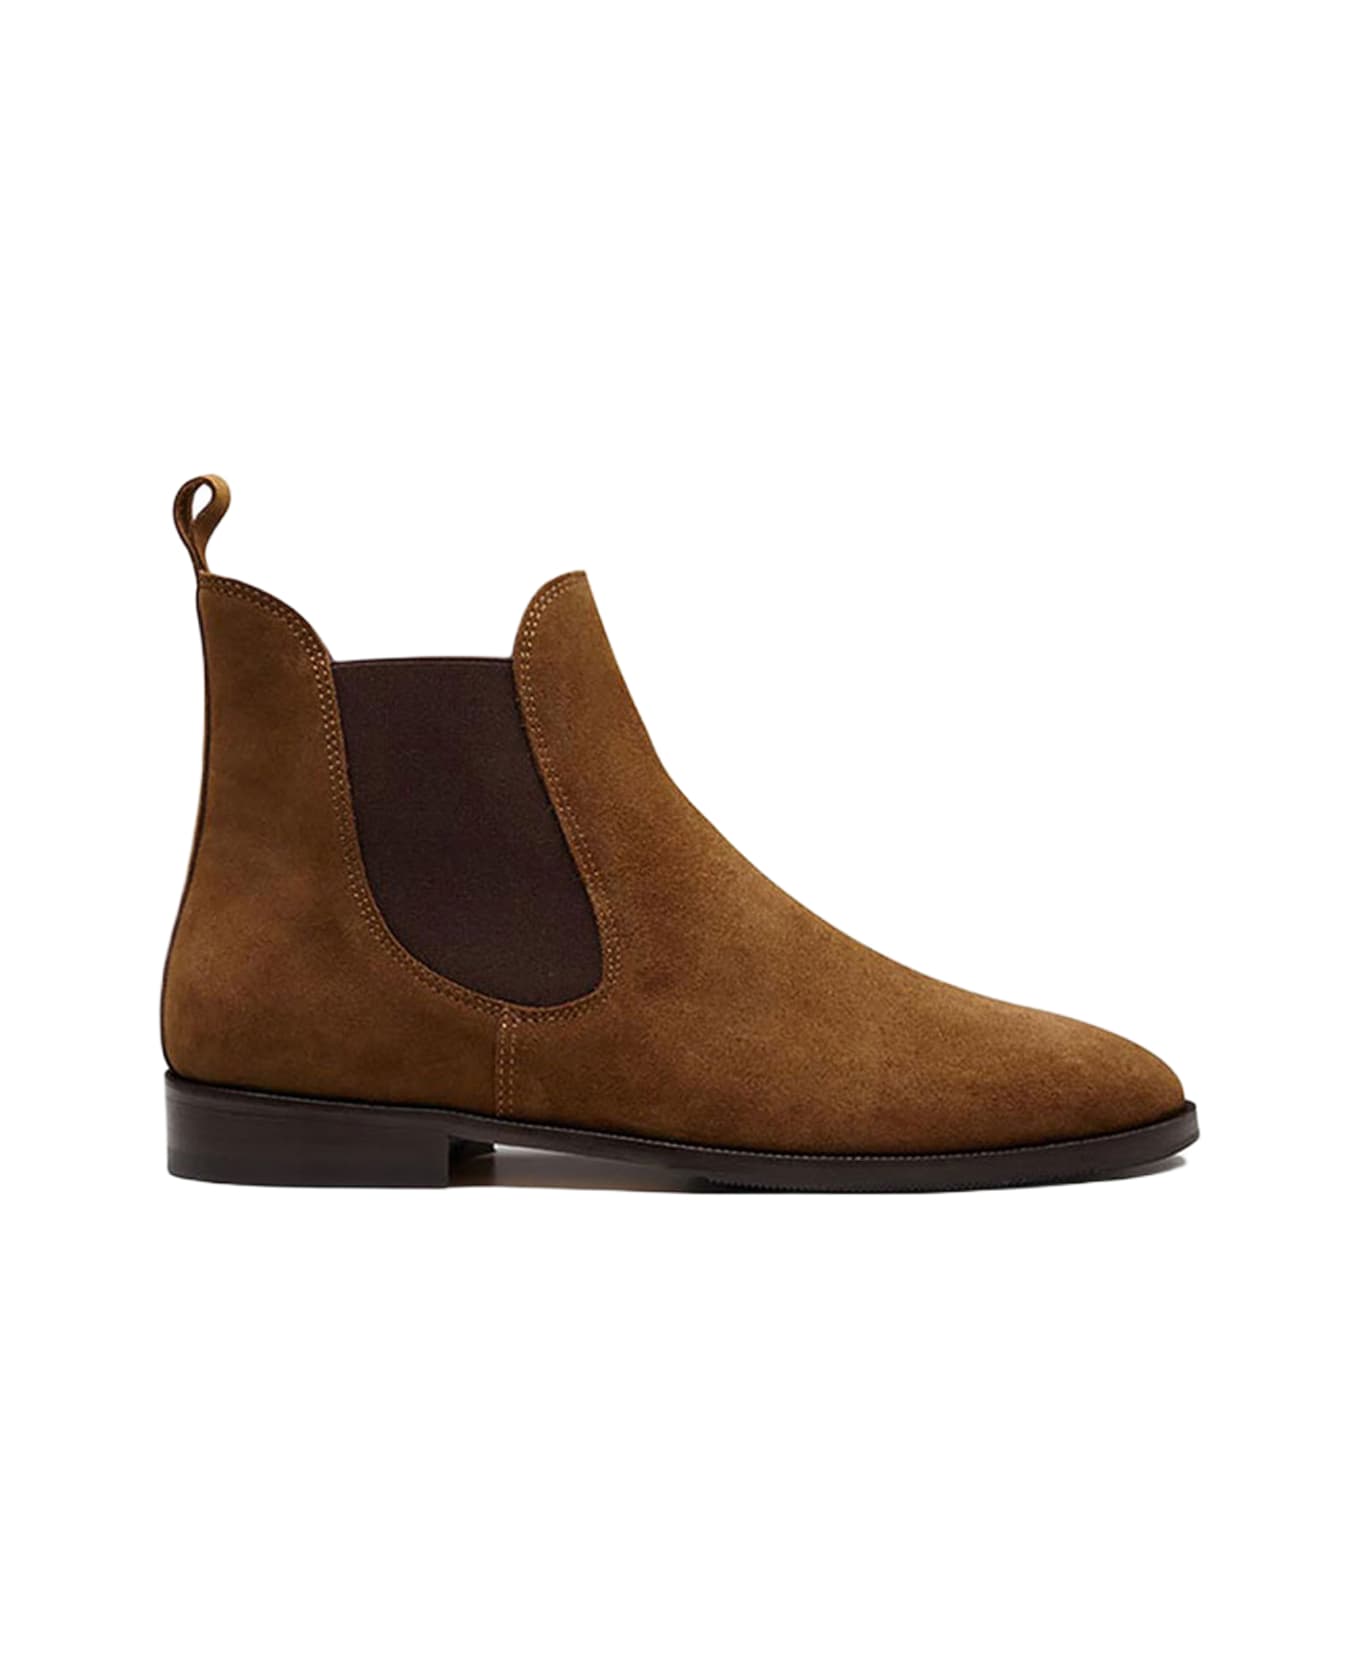 CB Made in Italy Suede Boots Sessanta - Tobacco